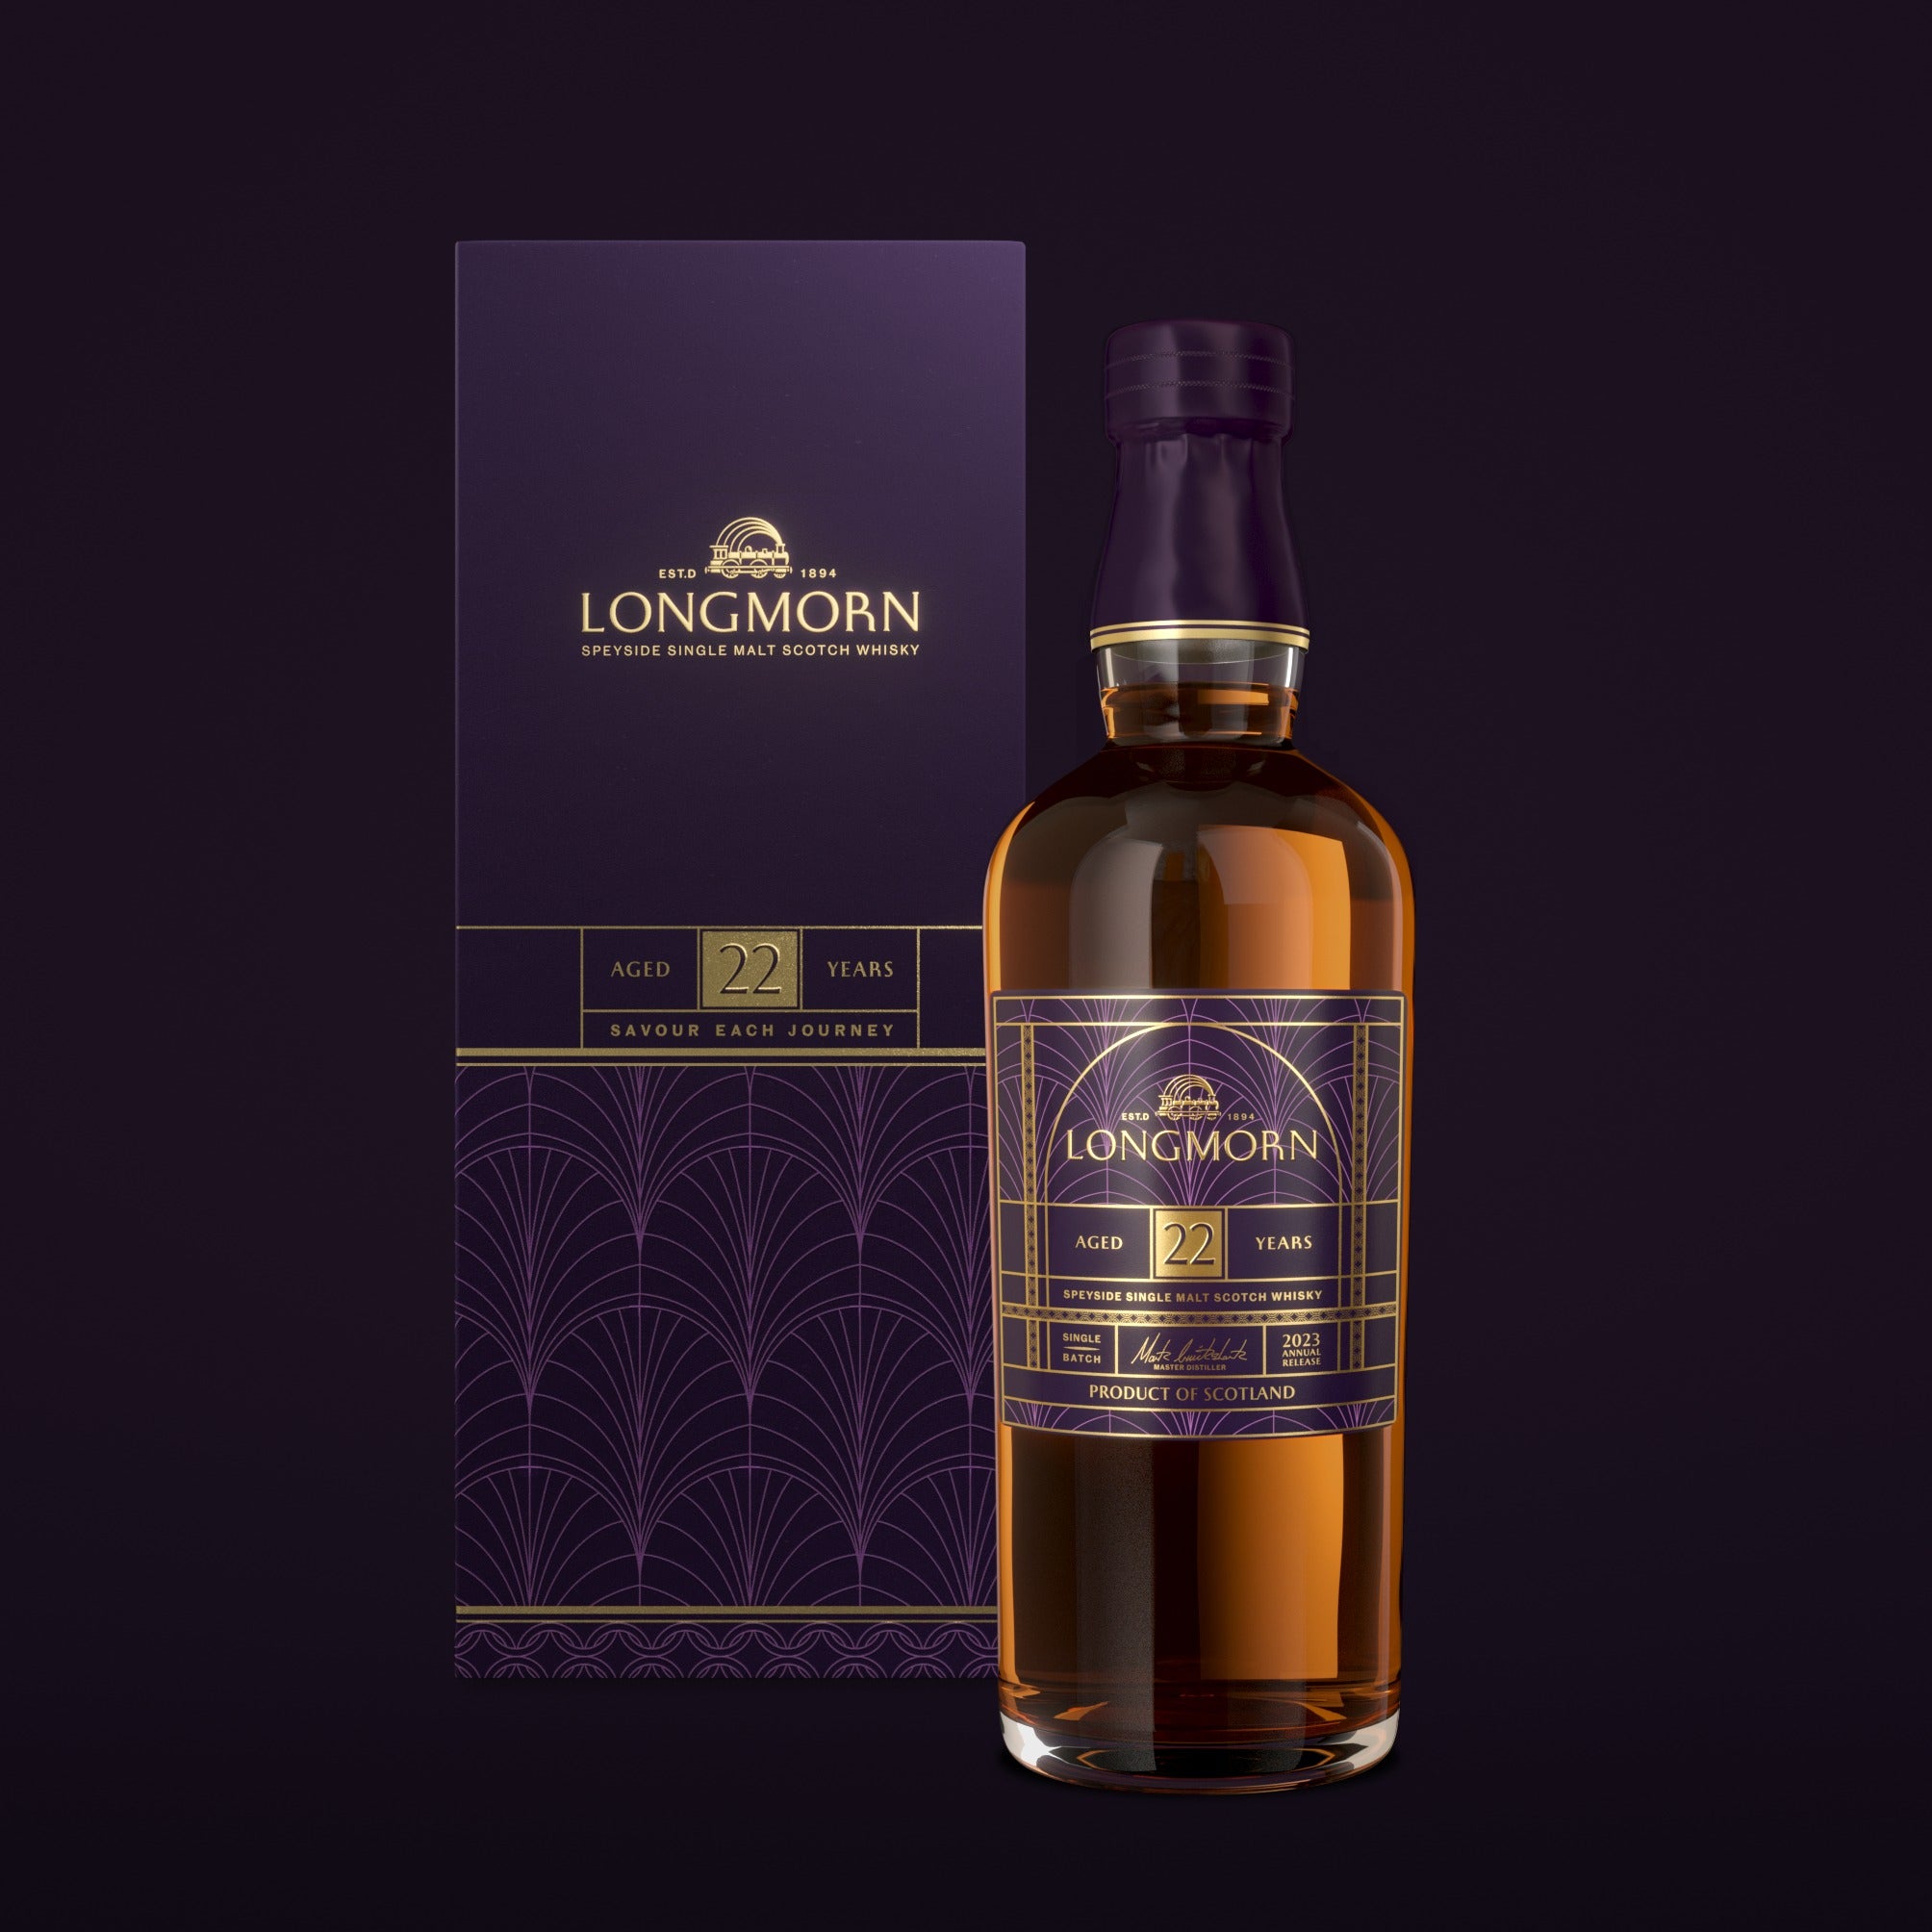 longmorn scotch whisky 22 year old bottle and box